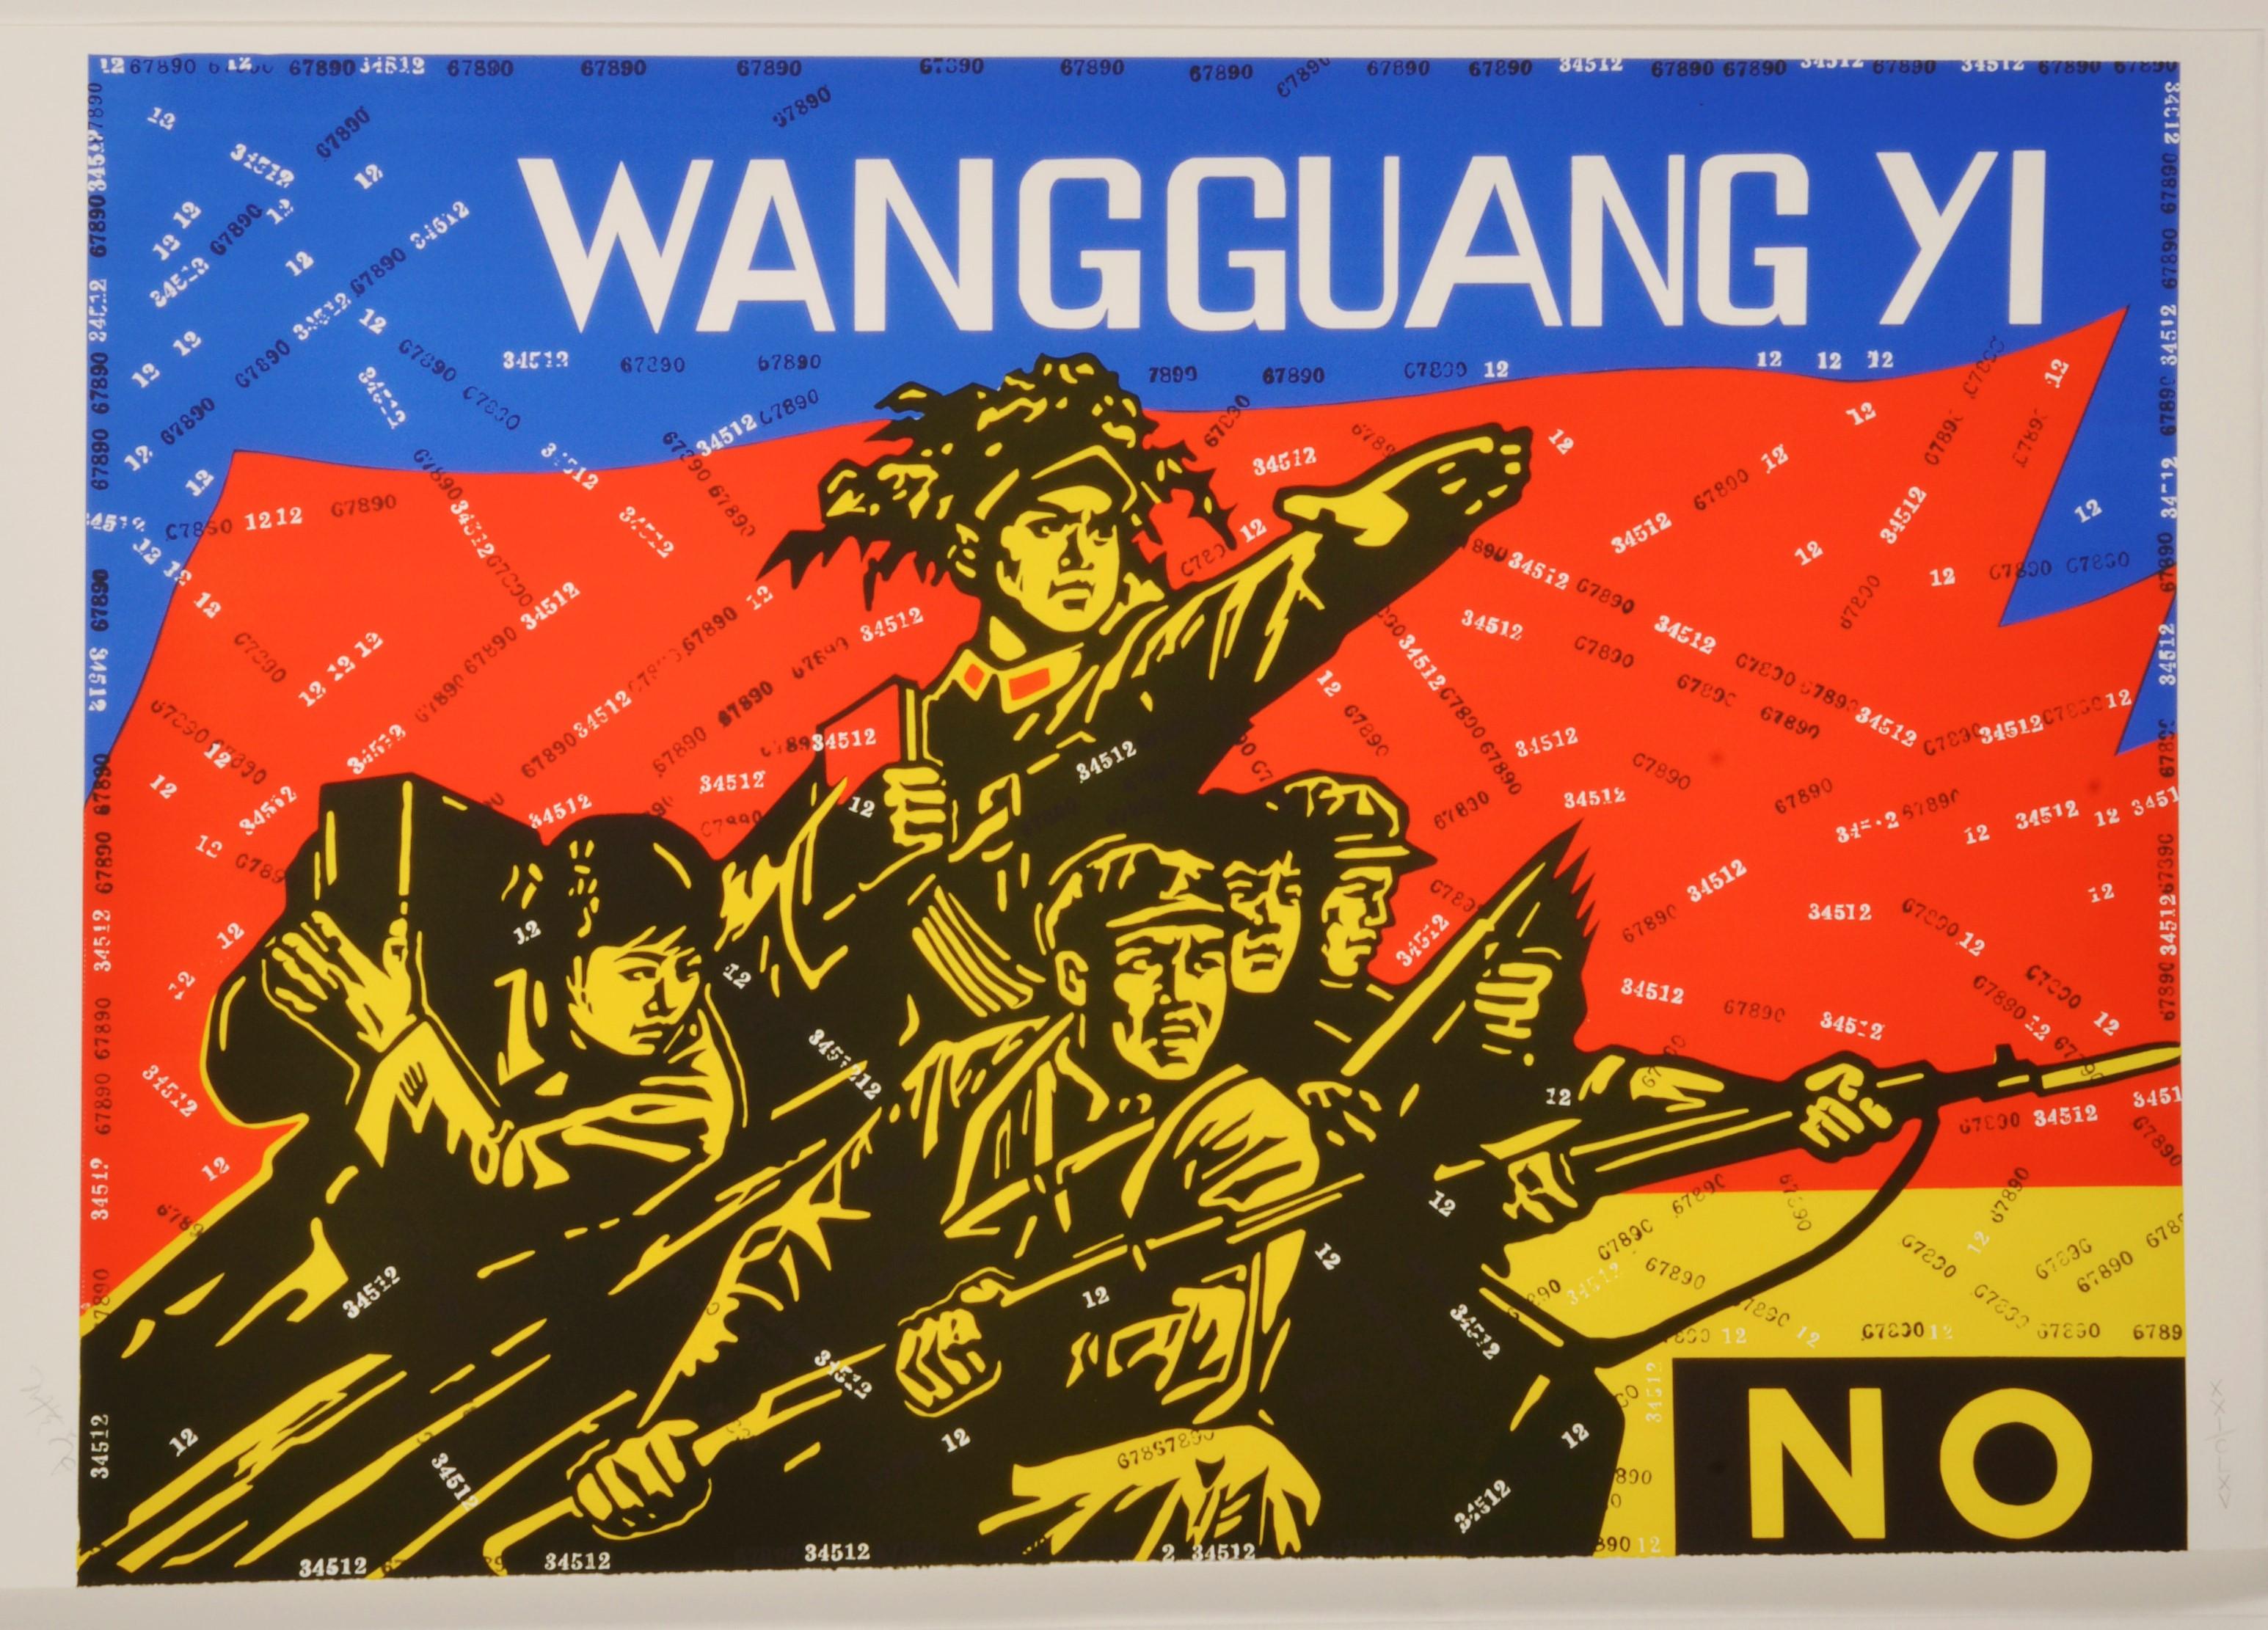 Wang Guangyi, Wang Guangyi No
Lithograph on Velin BFK Rives 300 gr 
Accompanied by poem by Fernando Arrabal
Edition of 165 plus 4 APs
80 x 120 cm (31.5 x 47.2 in.)
Signed and numbered, accompanied by Certificate of Authenticity
In mint condition, as